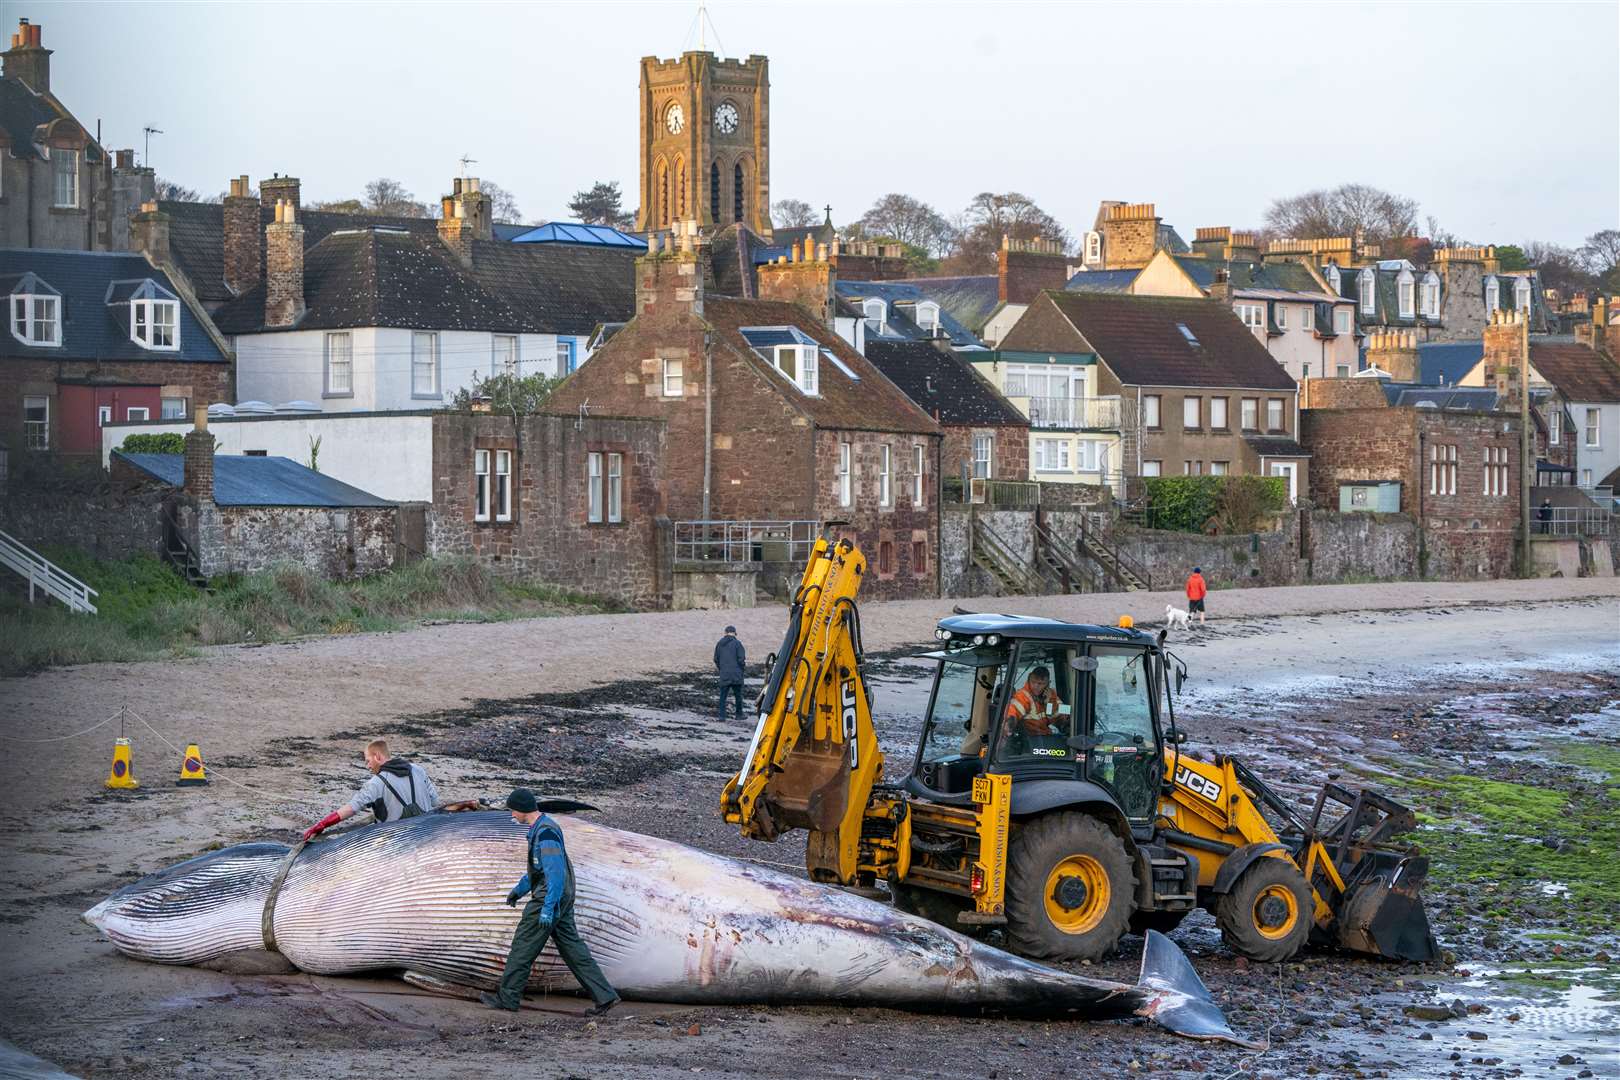 The workers took several hours to remove the whale from the beach (Jane Barlow/PA)